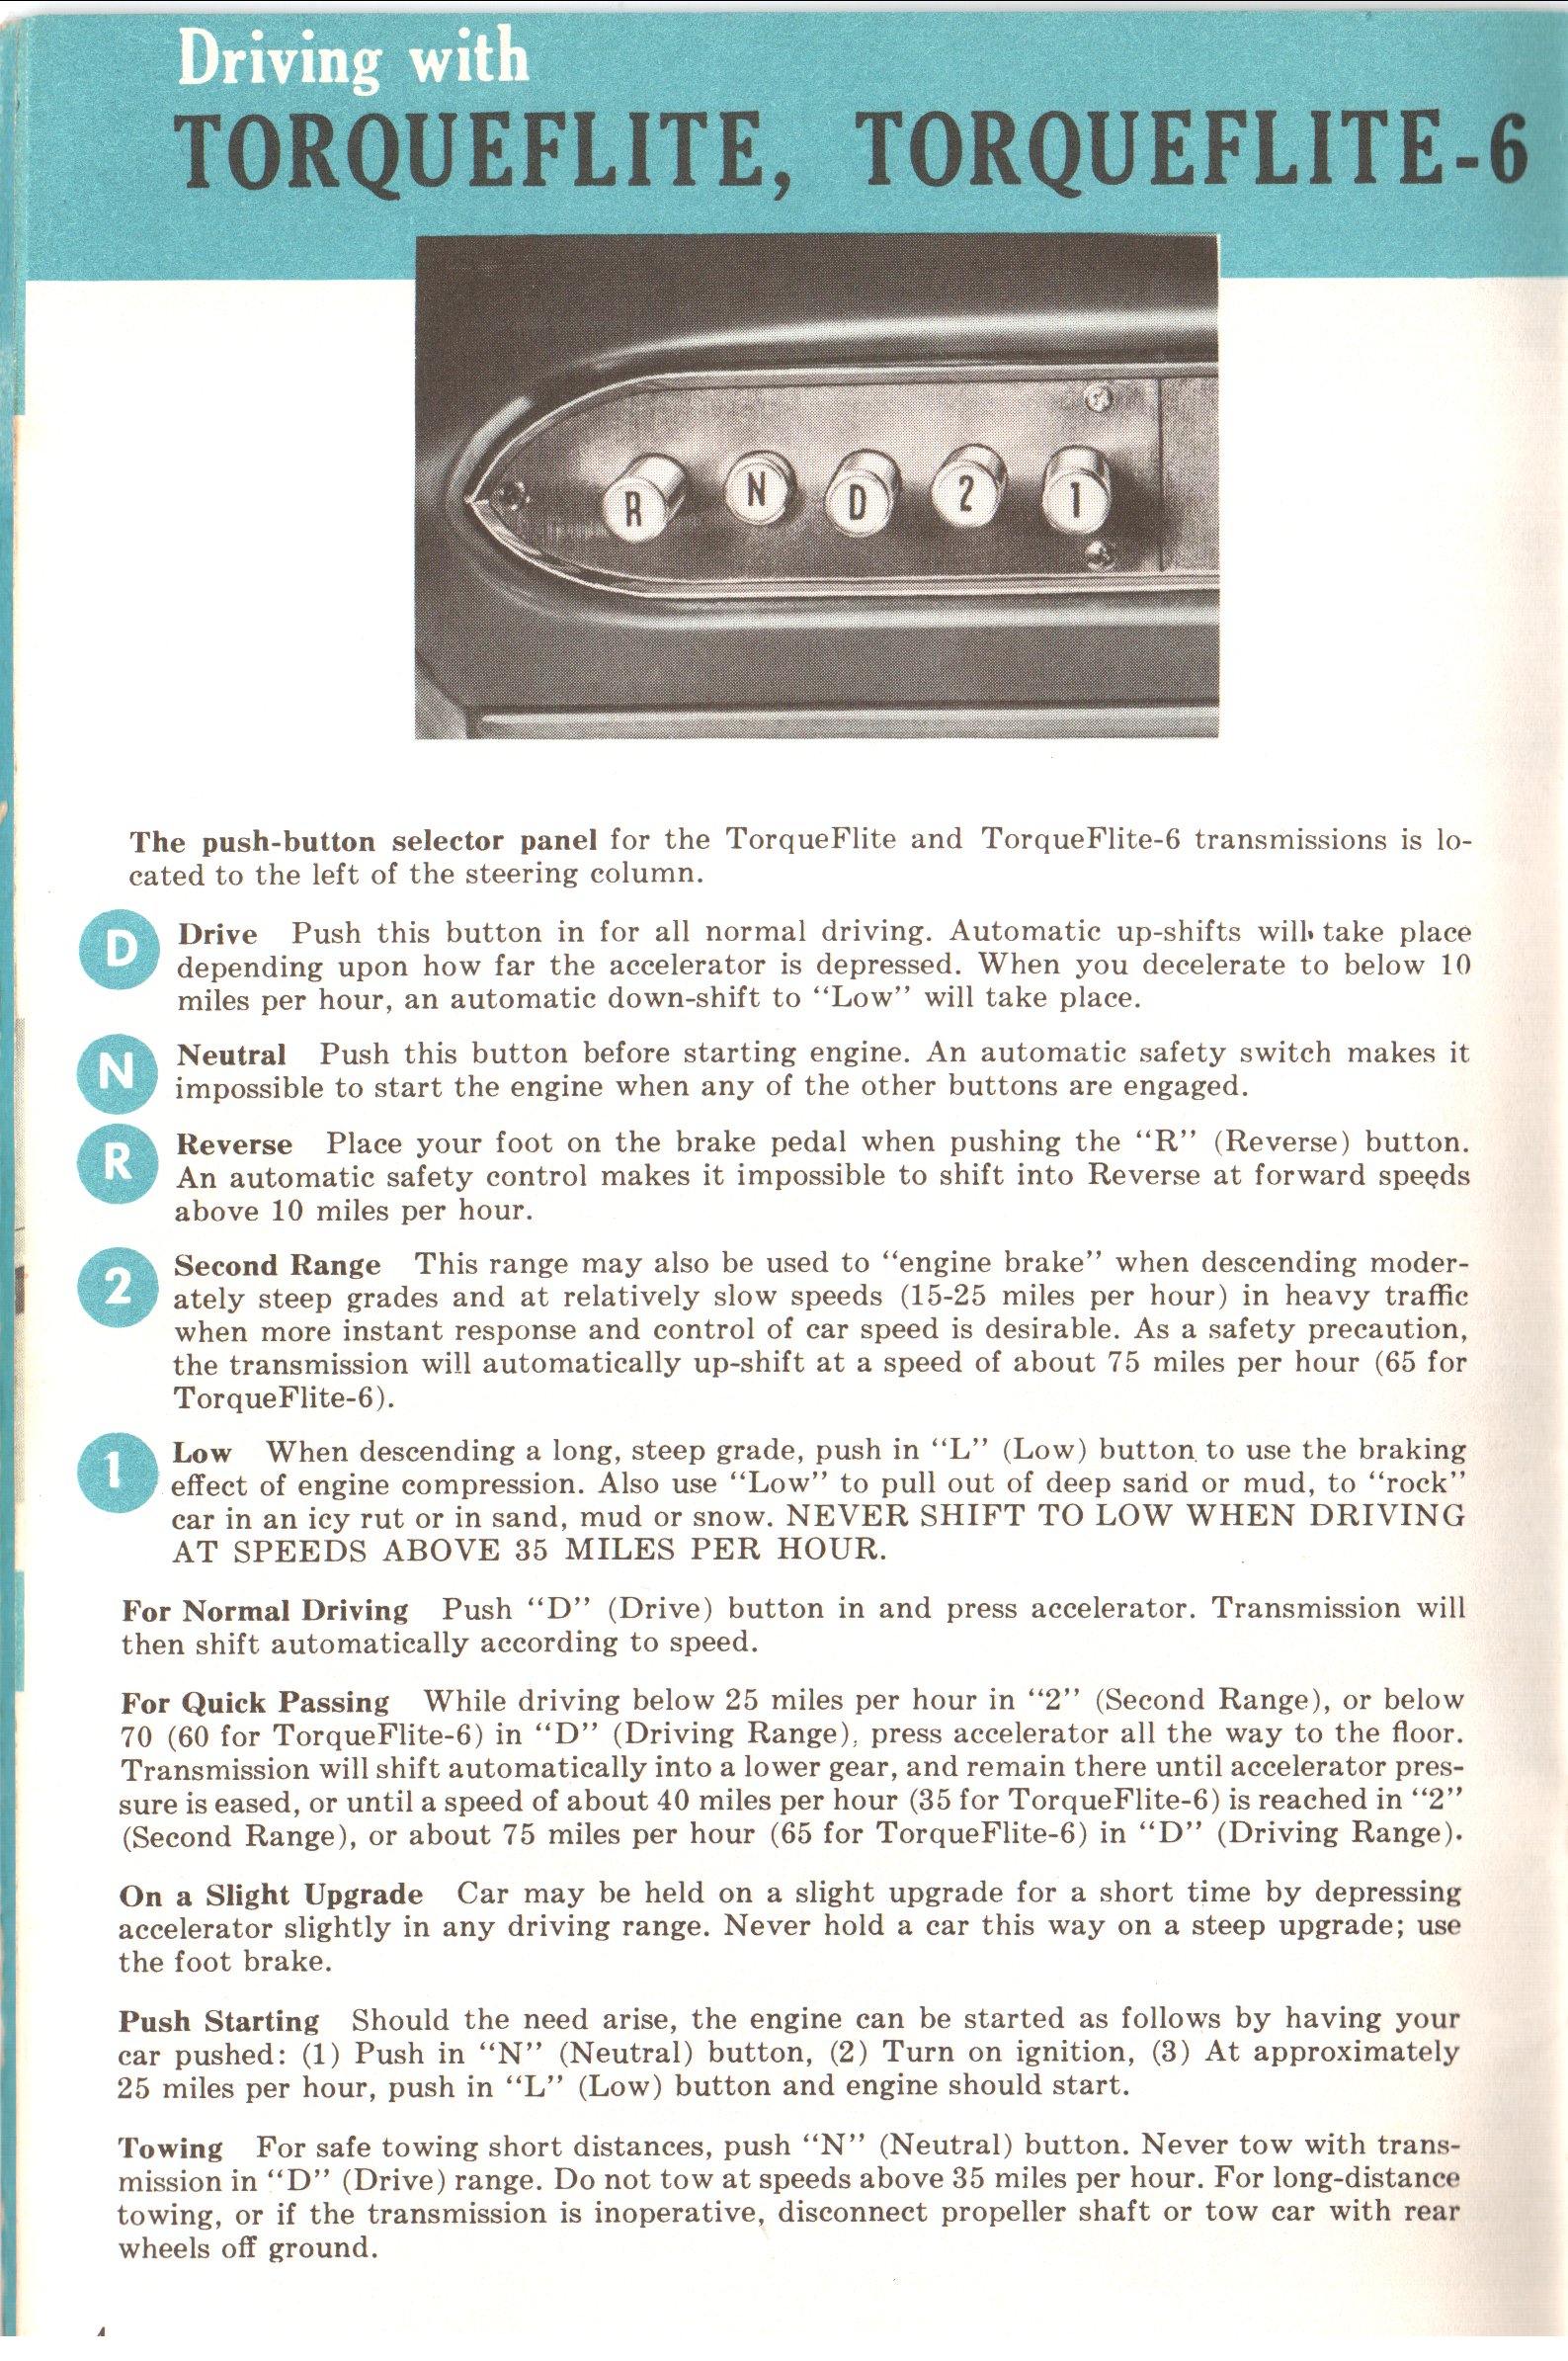 1960_Plymouth_Owners_Manual-04